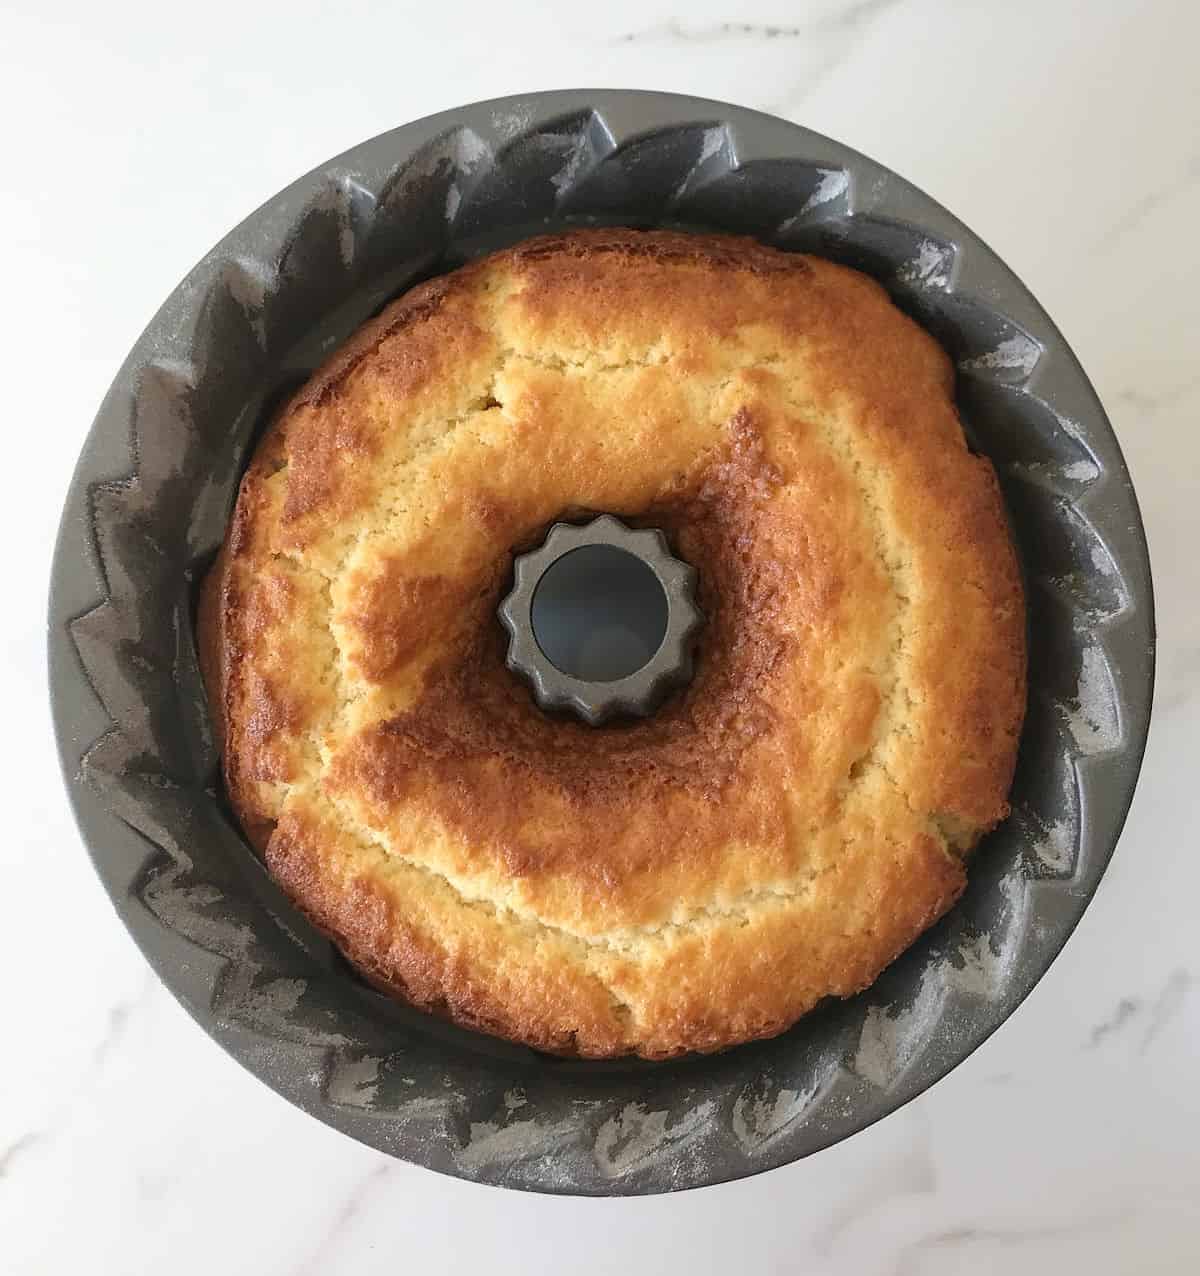 Aerial view of bundt pan with baked cake on white marble surface